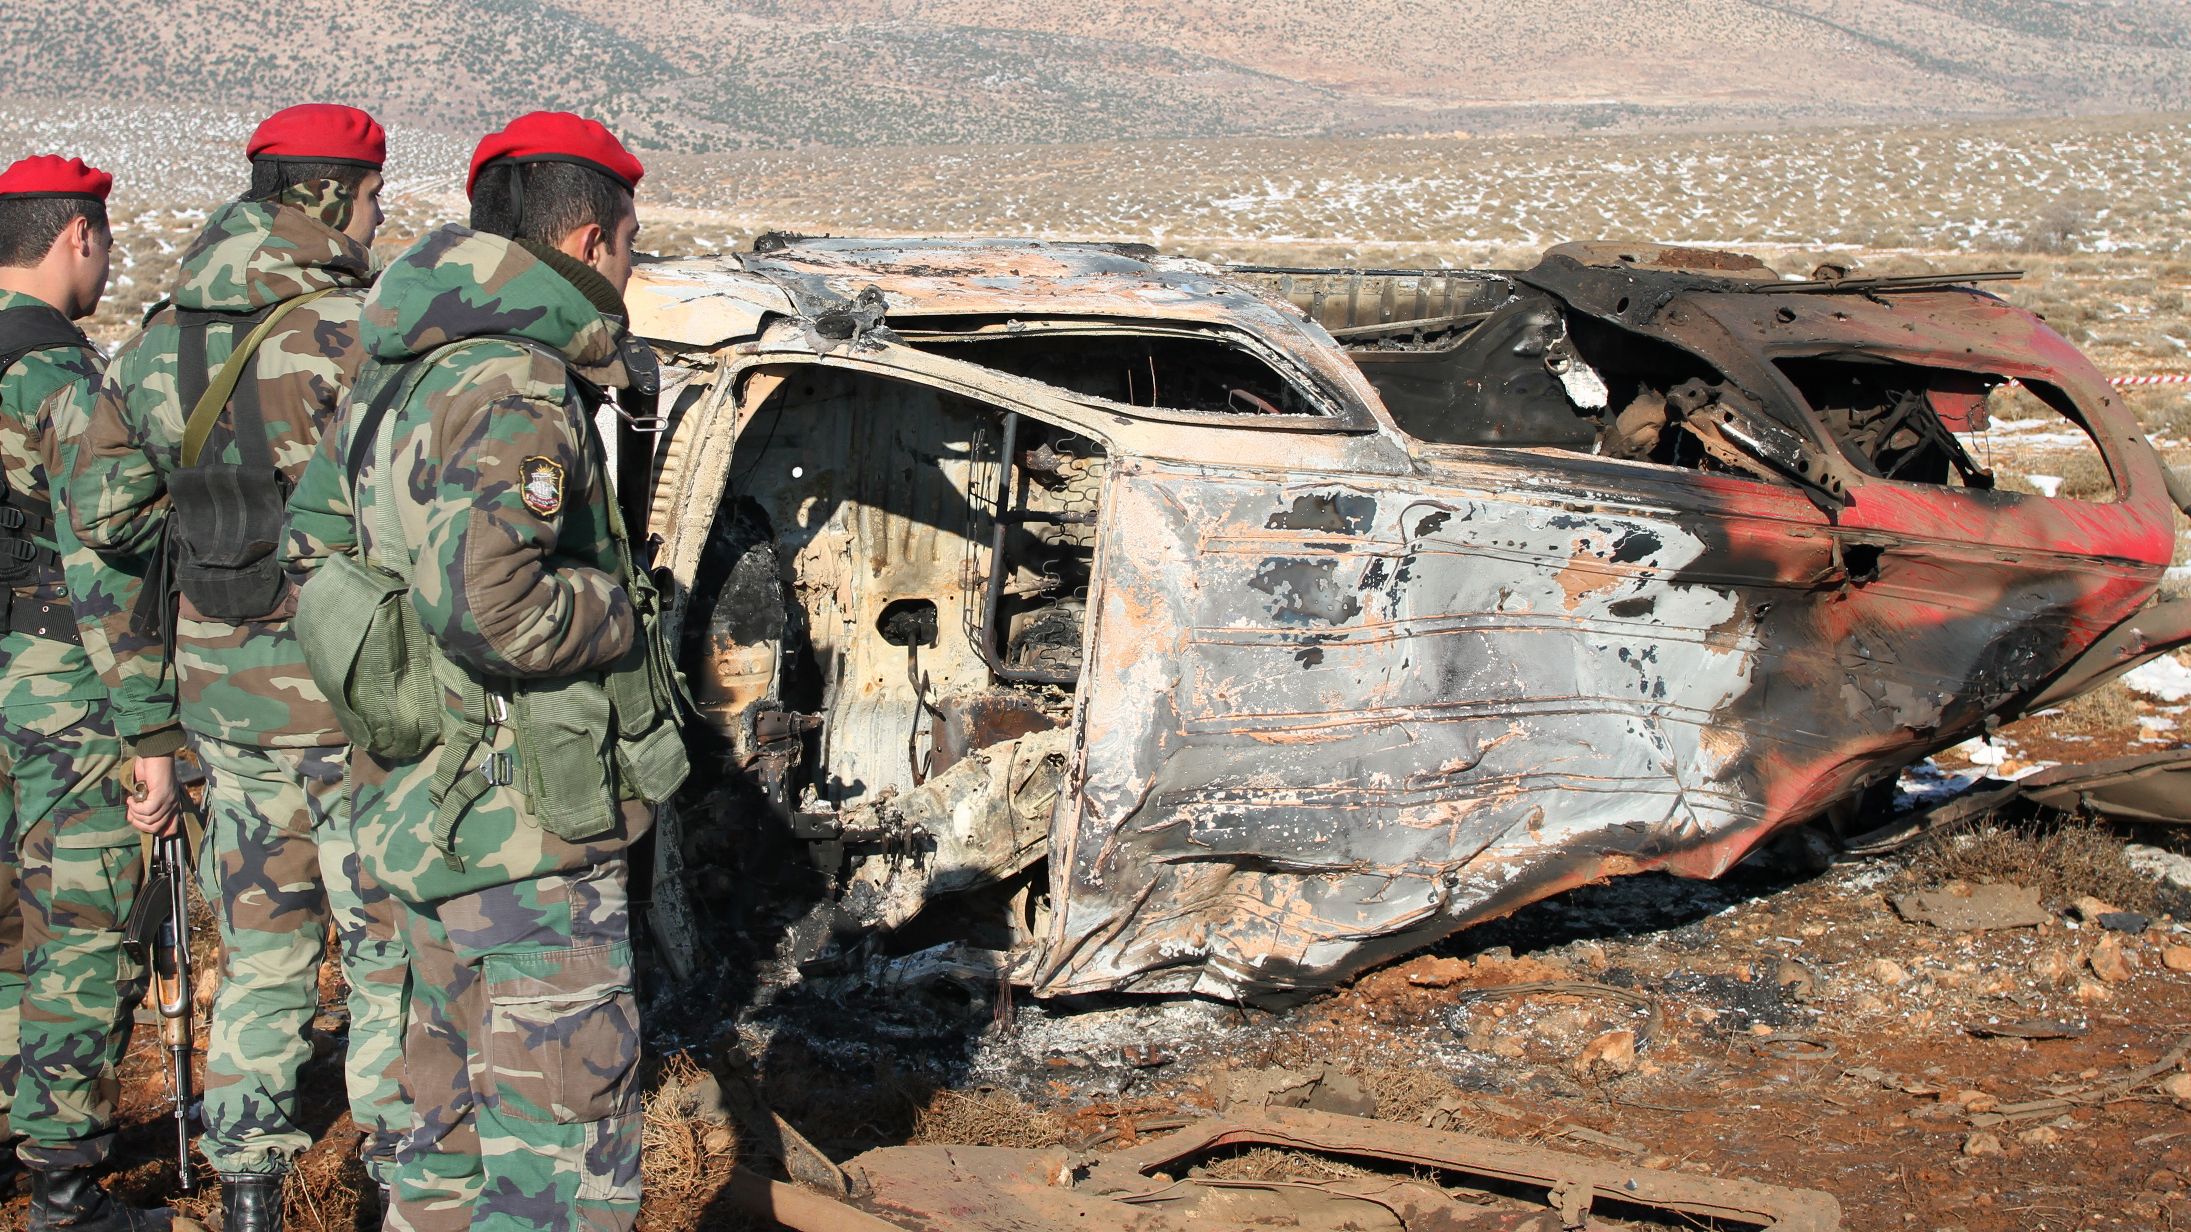 Lebanese soldiers stand next to the wreckage of a van following an explosion in the Bekaa valley on December 17.